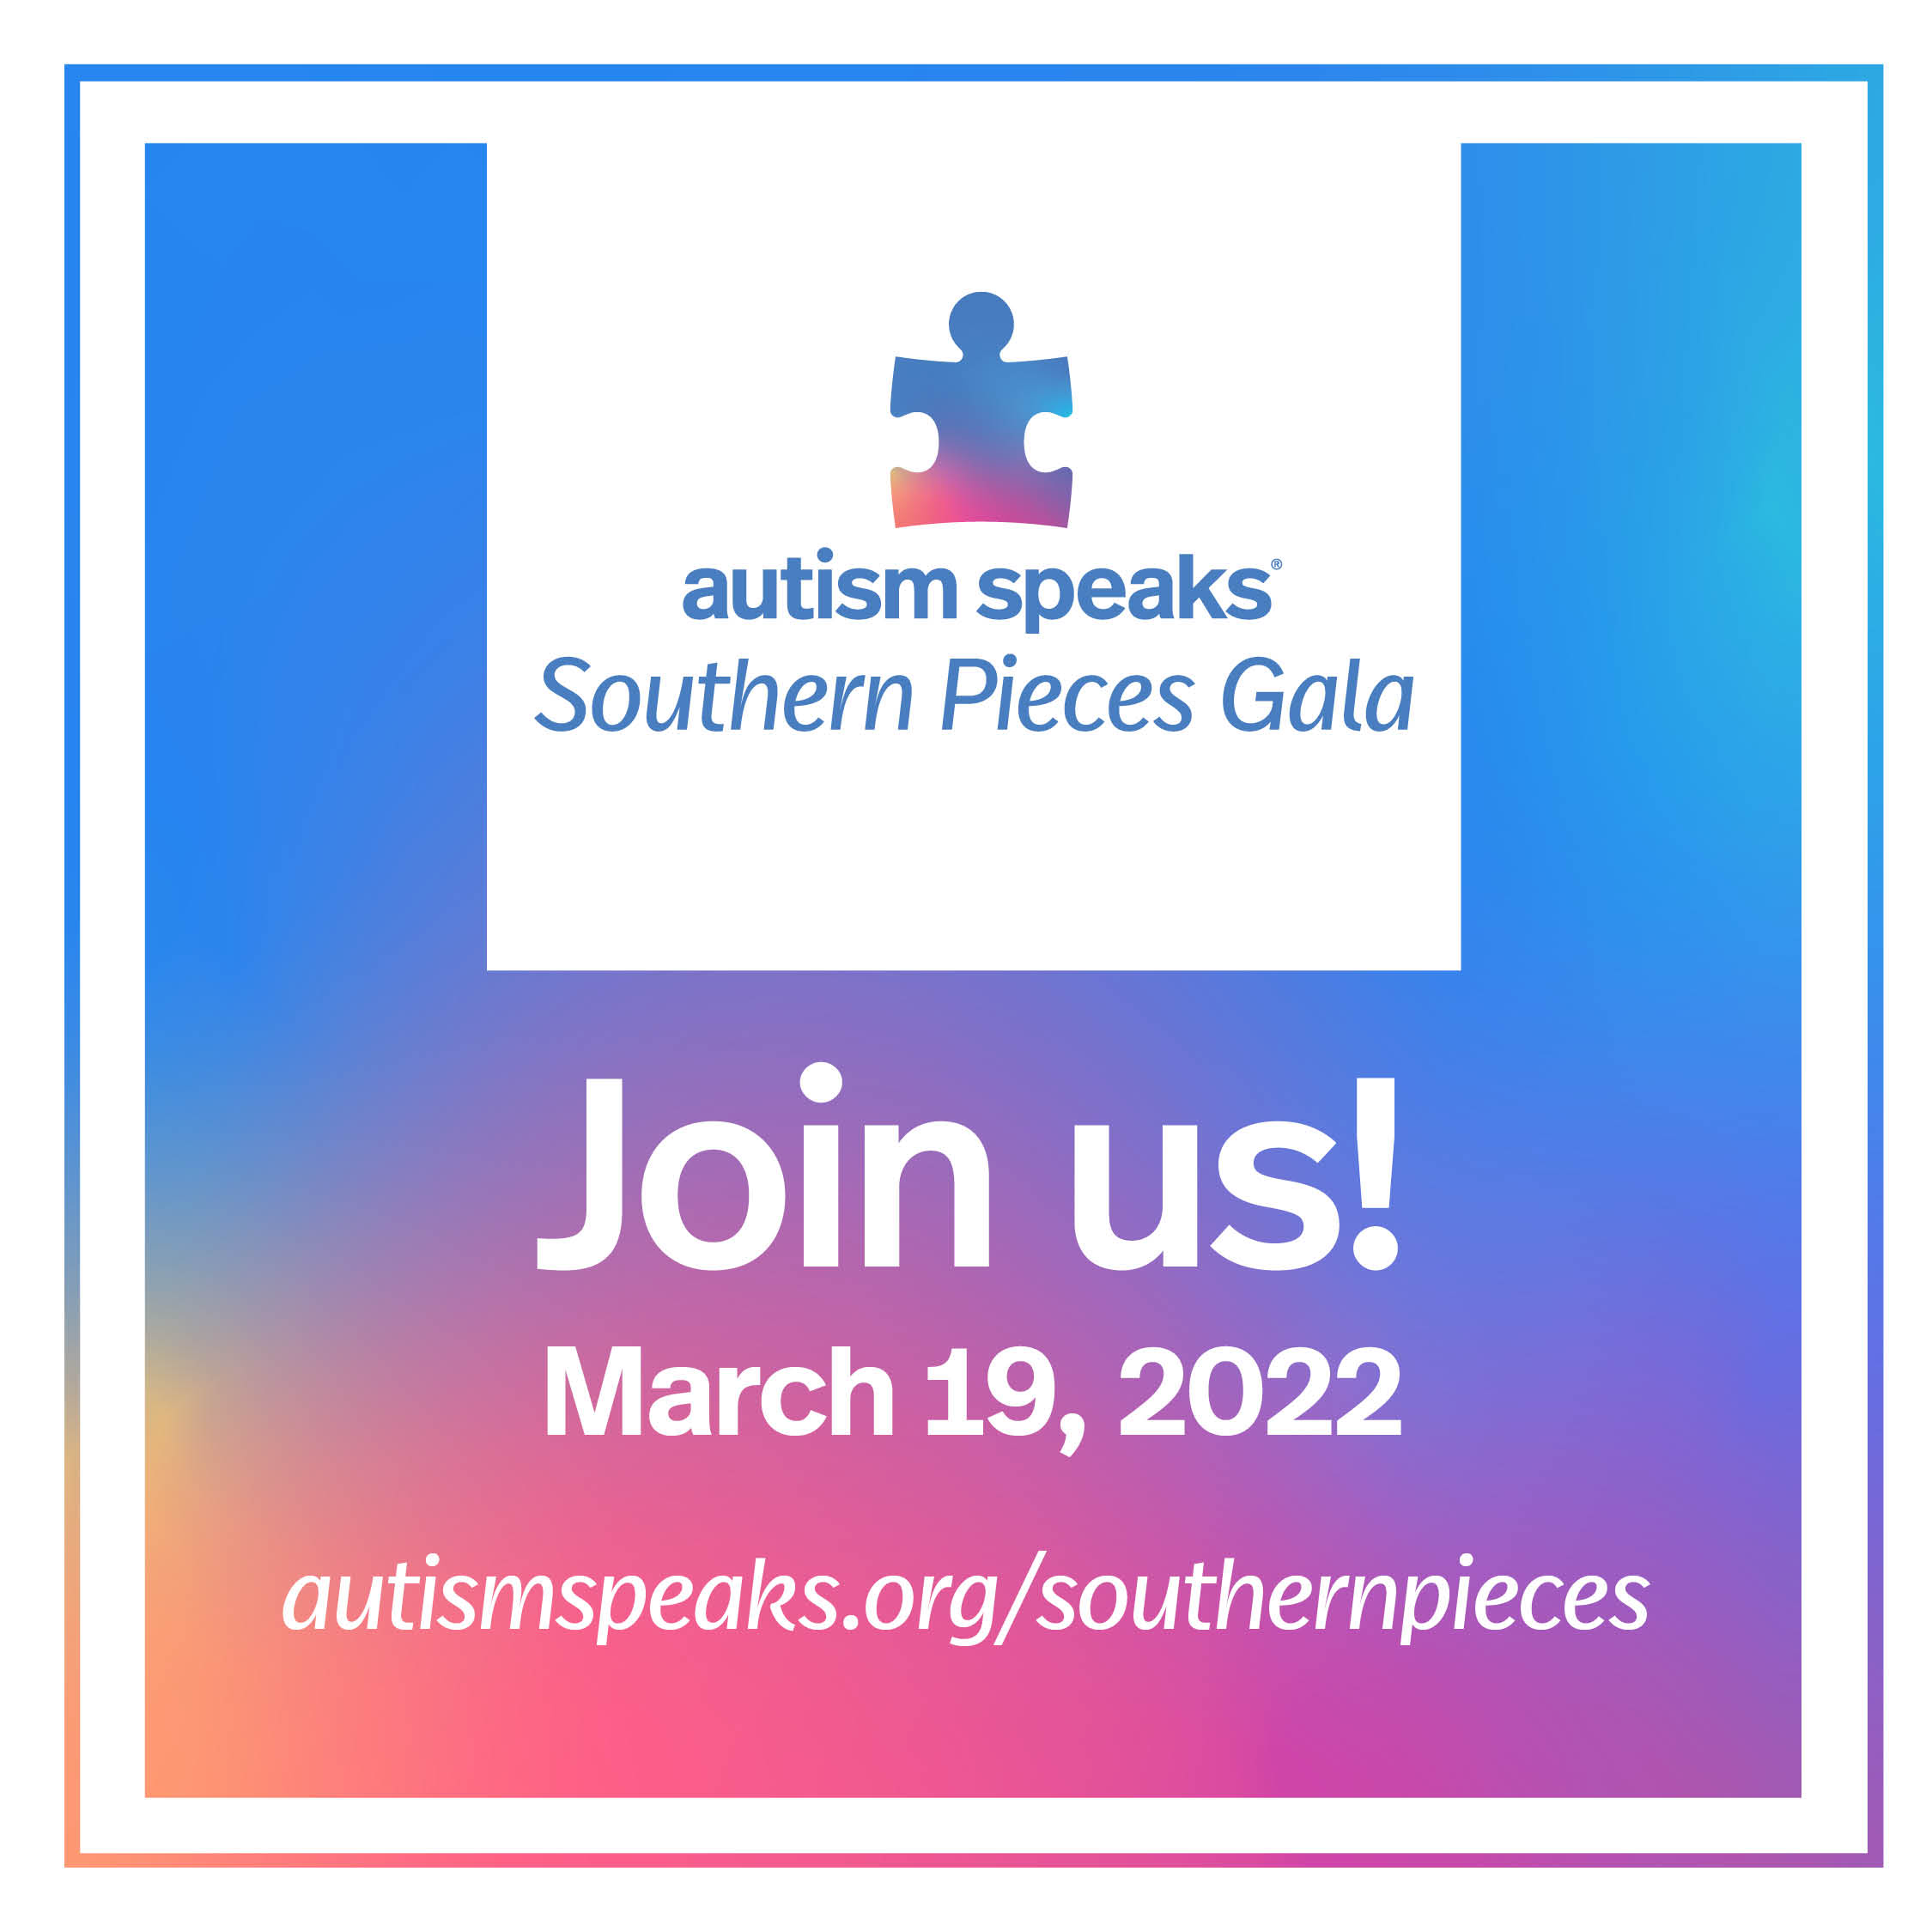 Southern Pieces Gala